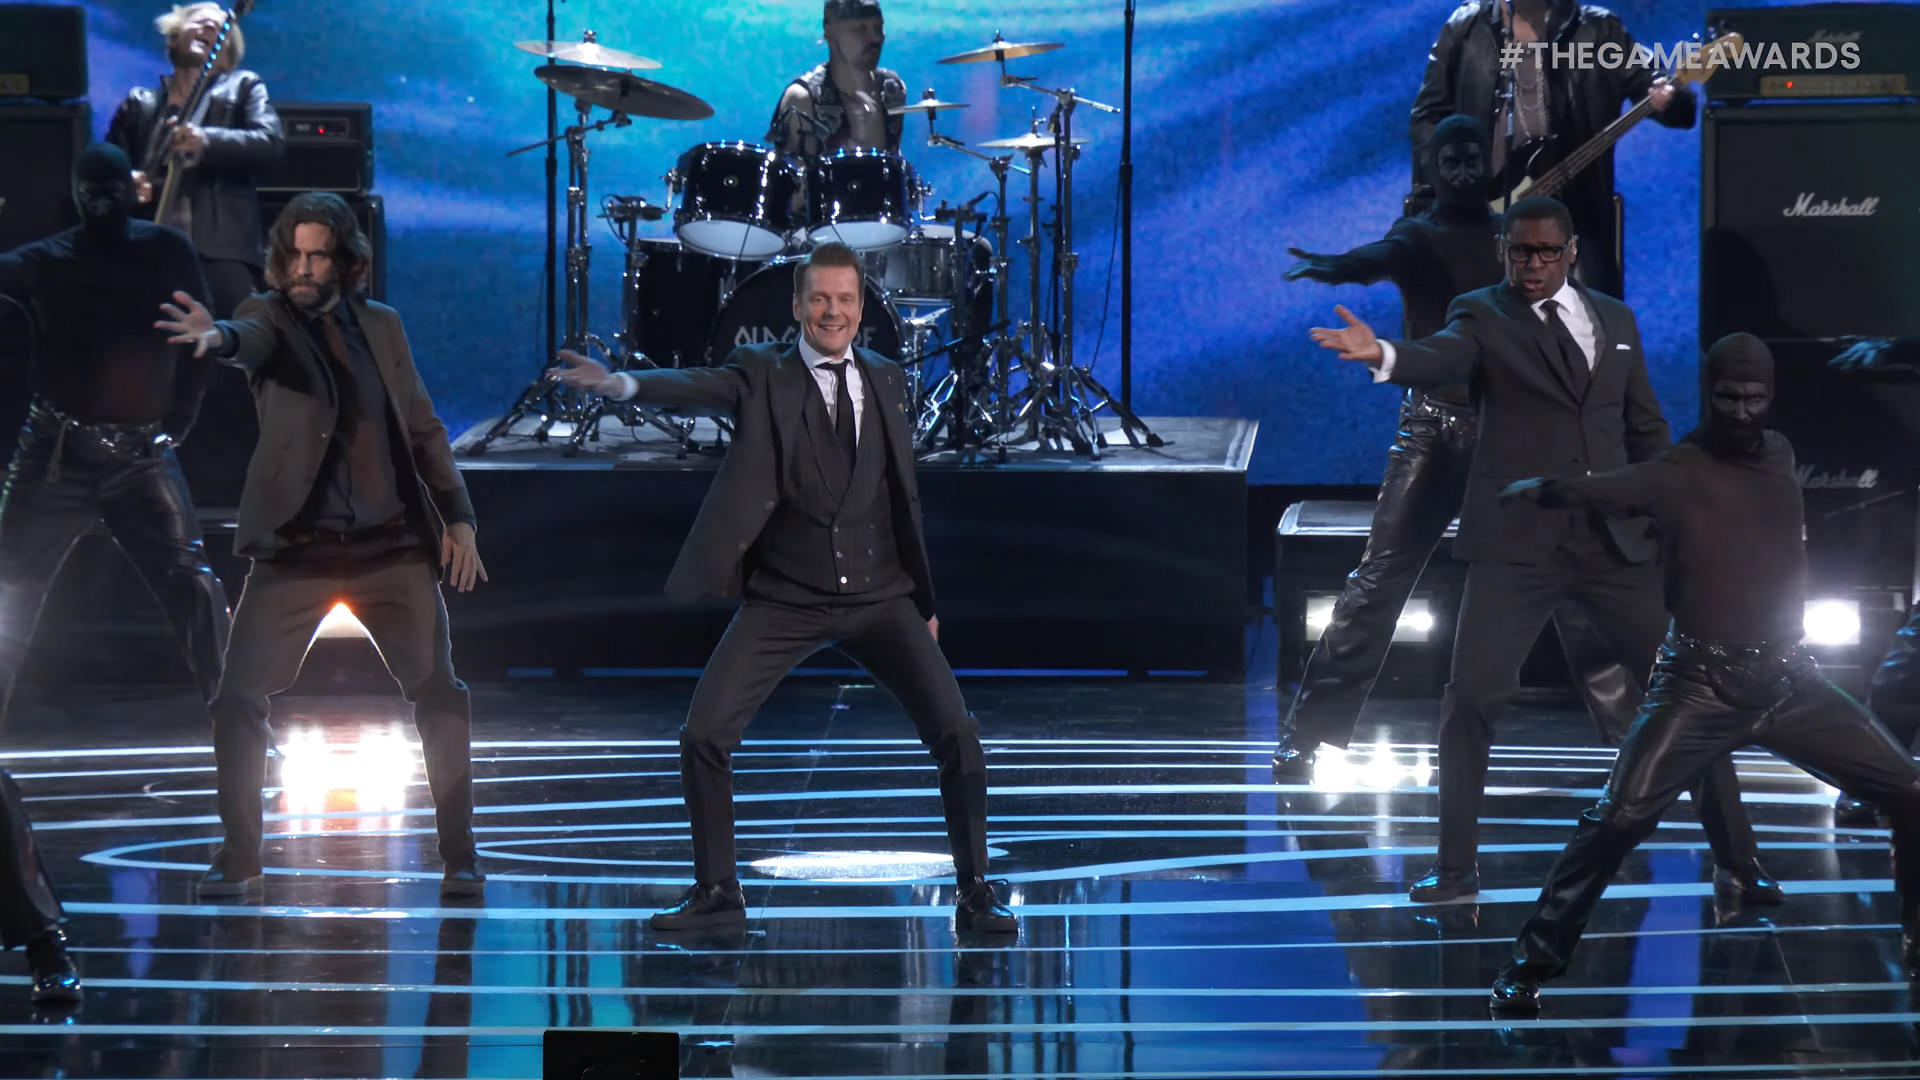 An image showing Sam Lake, Ilkka Villi, and David Harewood on stage of The Game Awards 2023 dancing to Herald of Darkness